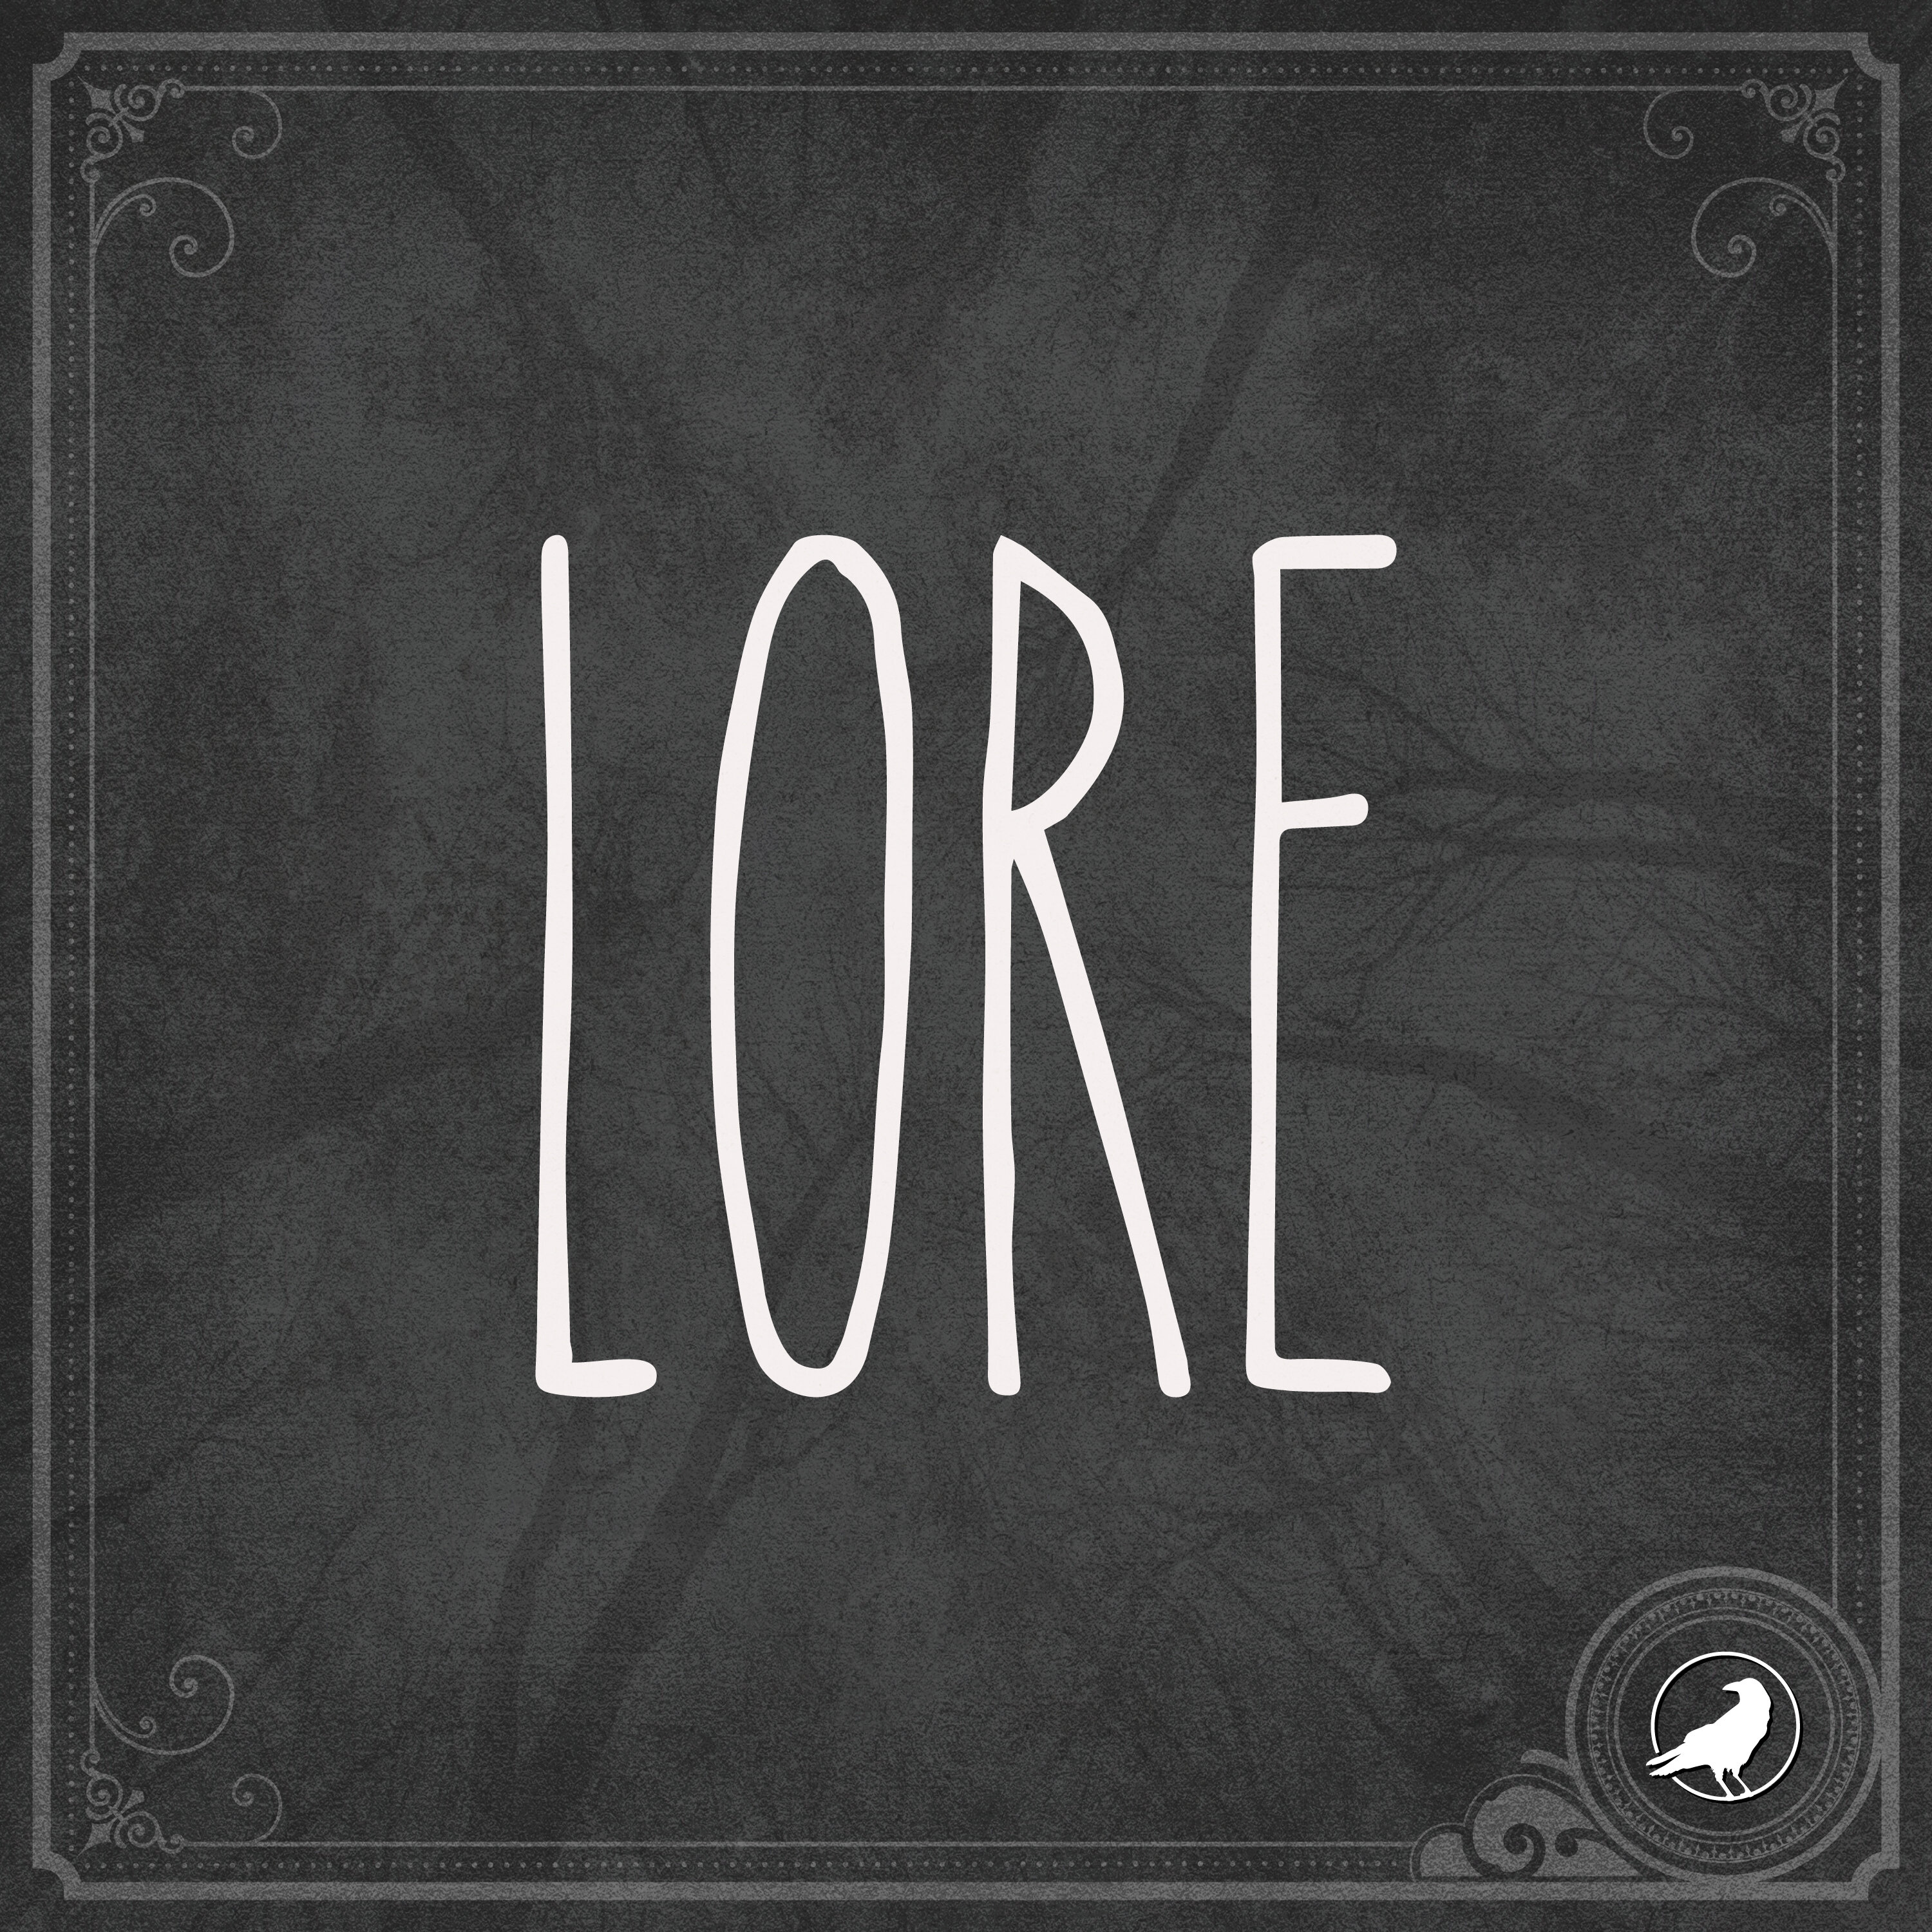 Lore by Aaron Mahnke and Grim & Mild